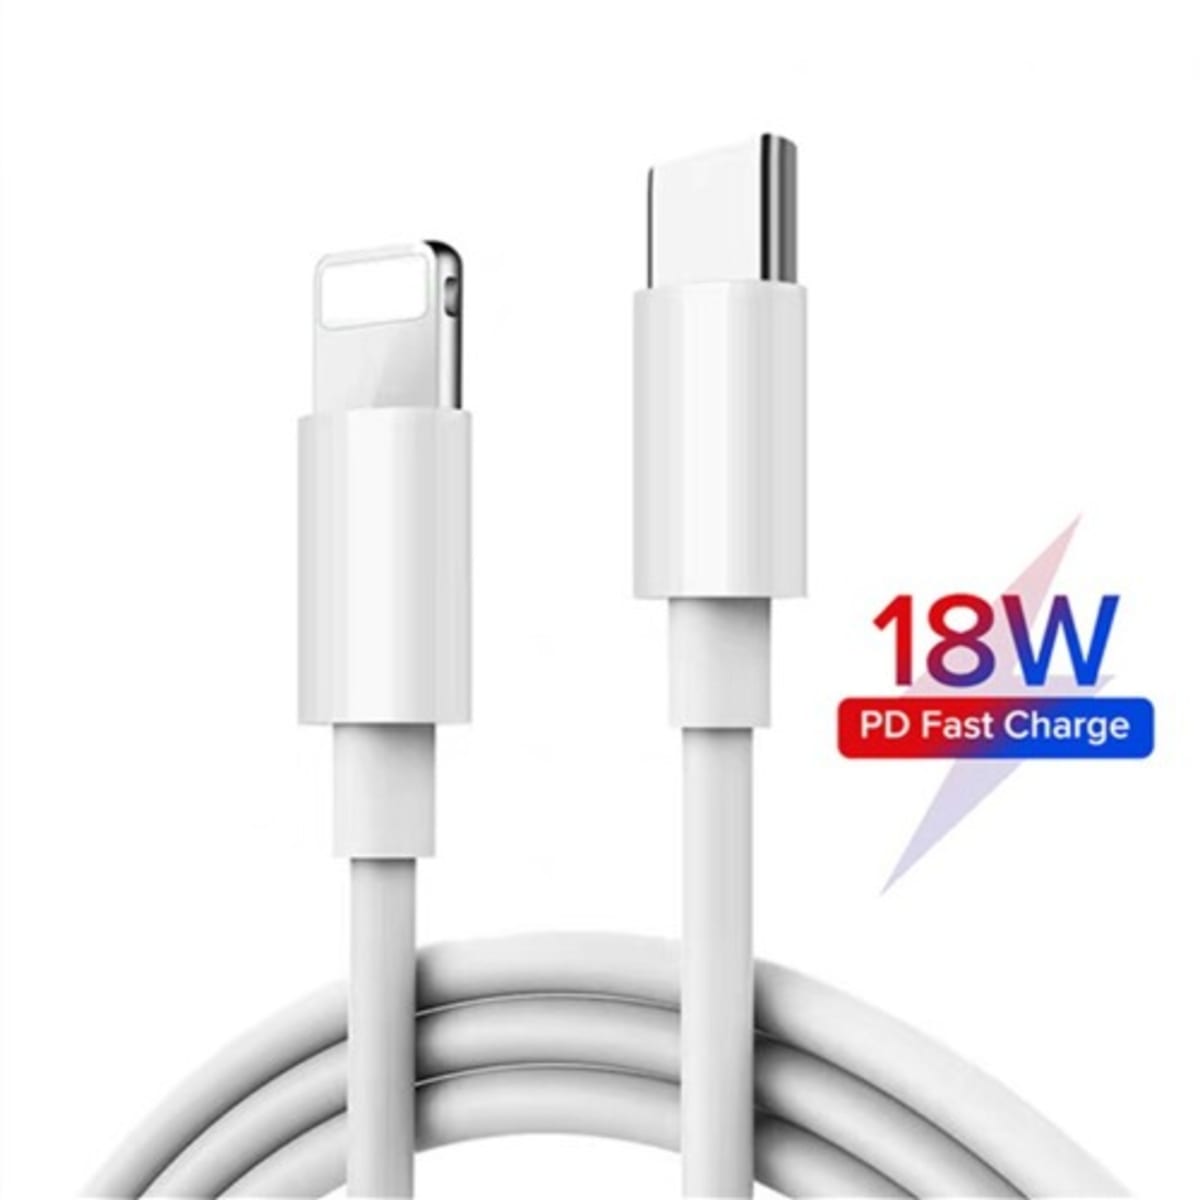 Fast Charging Your iPhone X With a USB-C to Lightning Cable